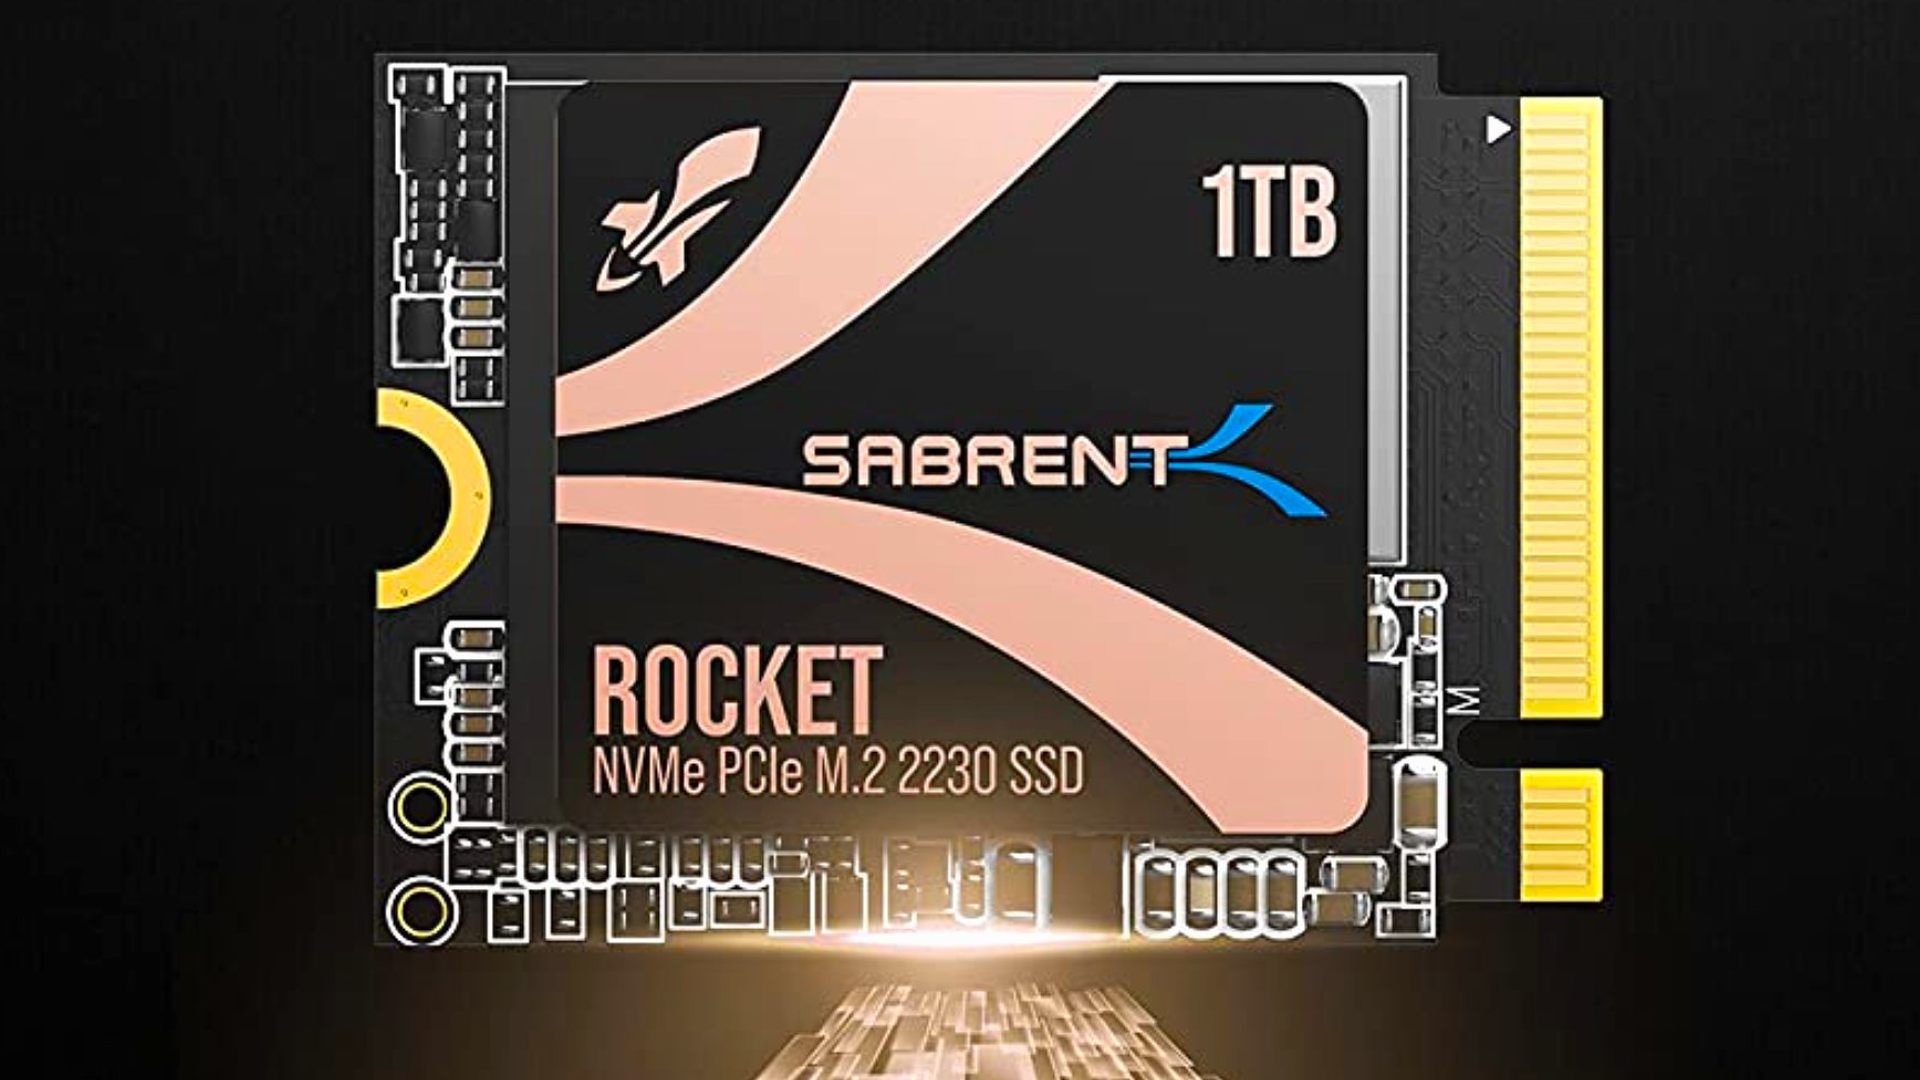 Best SSD for gaming: Sabrent Rocket 2230 SSD with dark backdrop and illumination below